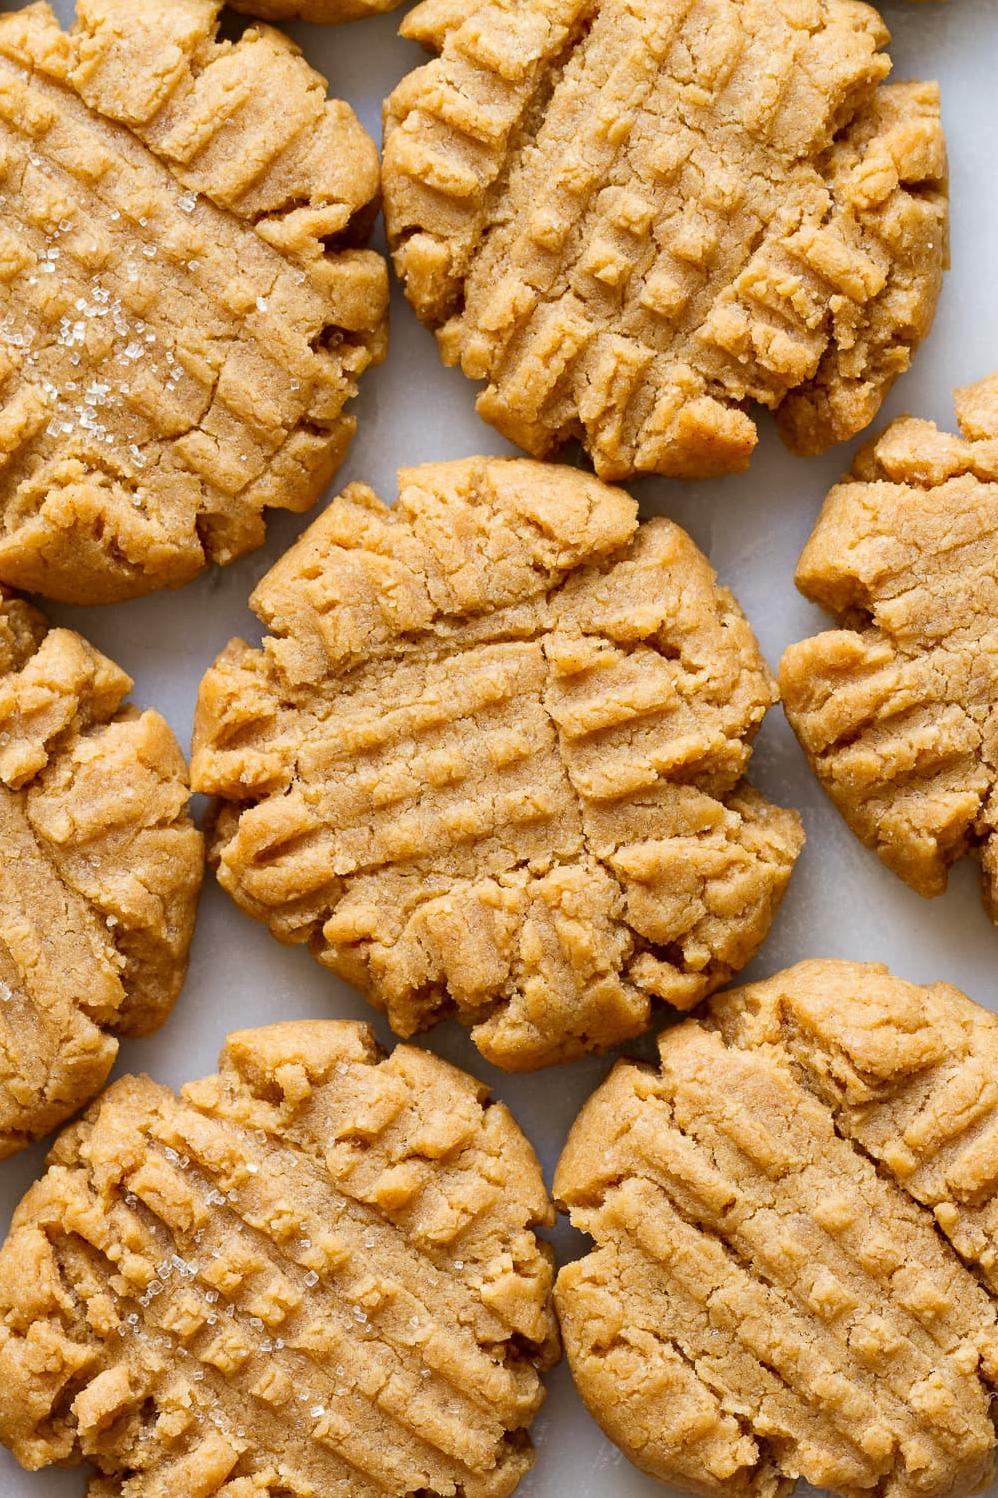  You won't miss the dairy in these cookies, and your lactose intolerant friends will thank you.